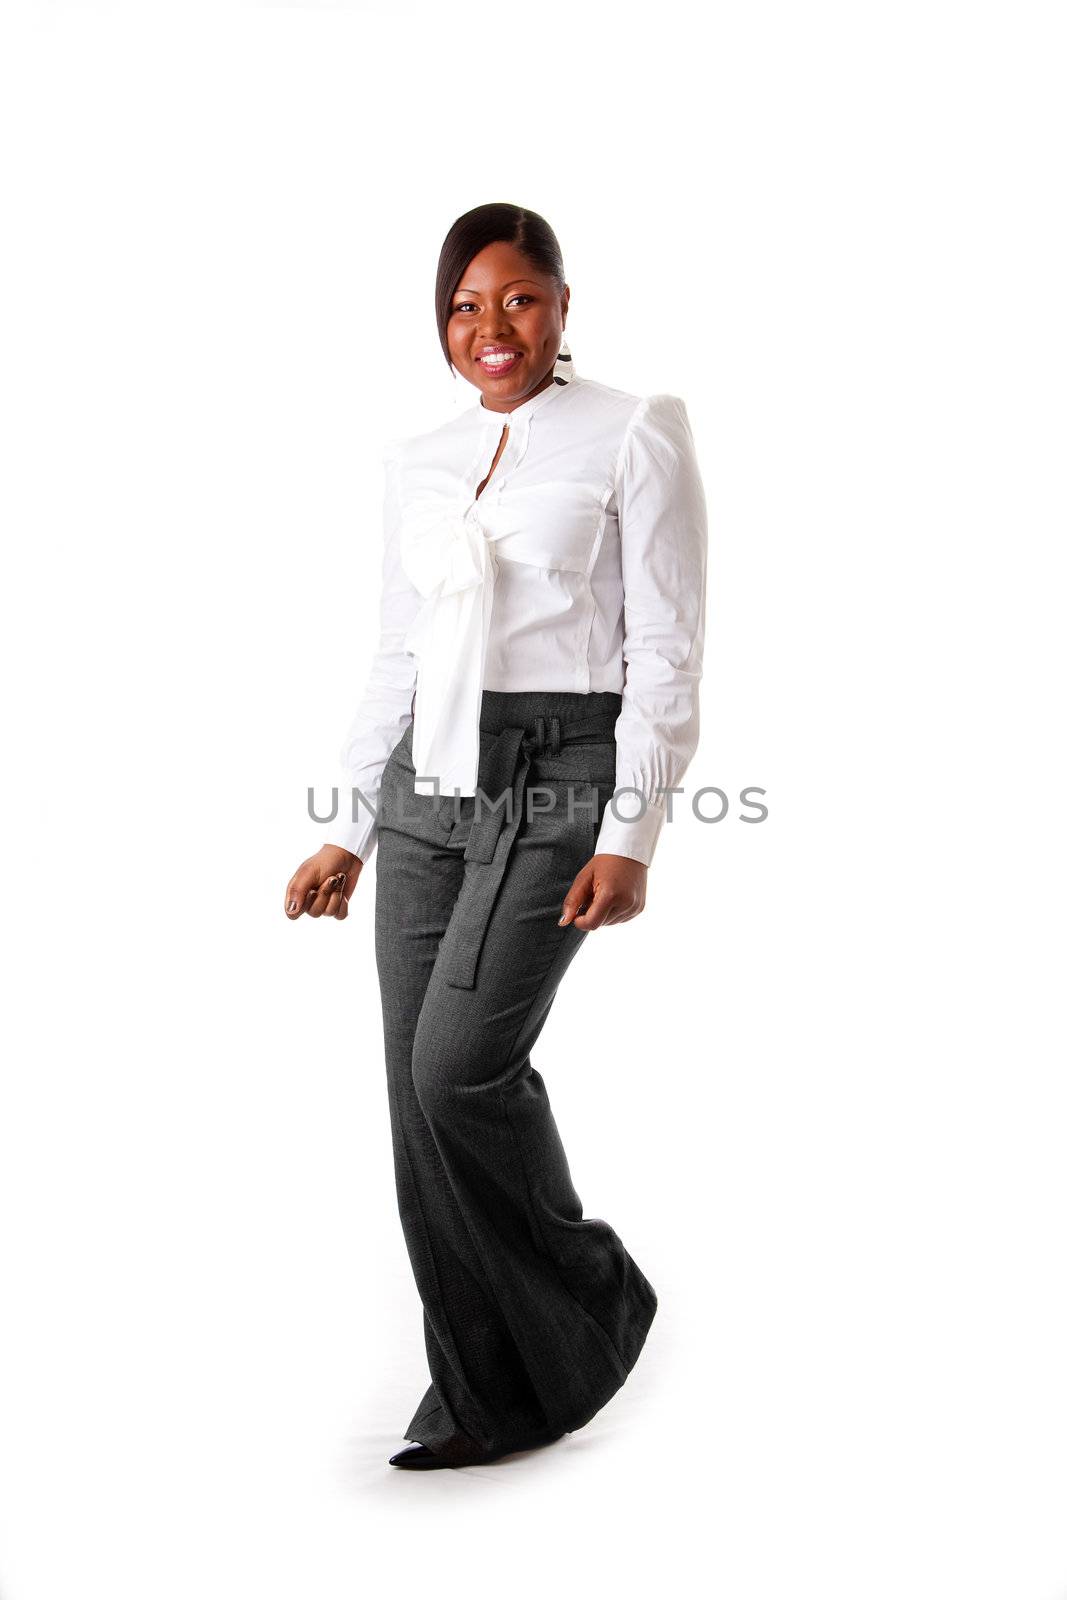 Beautiful African American business woman with attitude dressed in a white shirt and gray pants standing, dancing happy, isolated